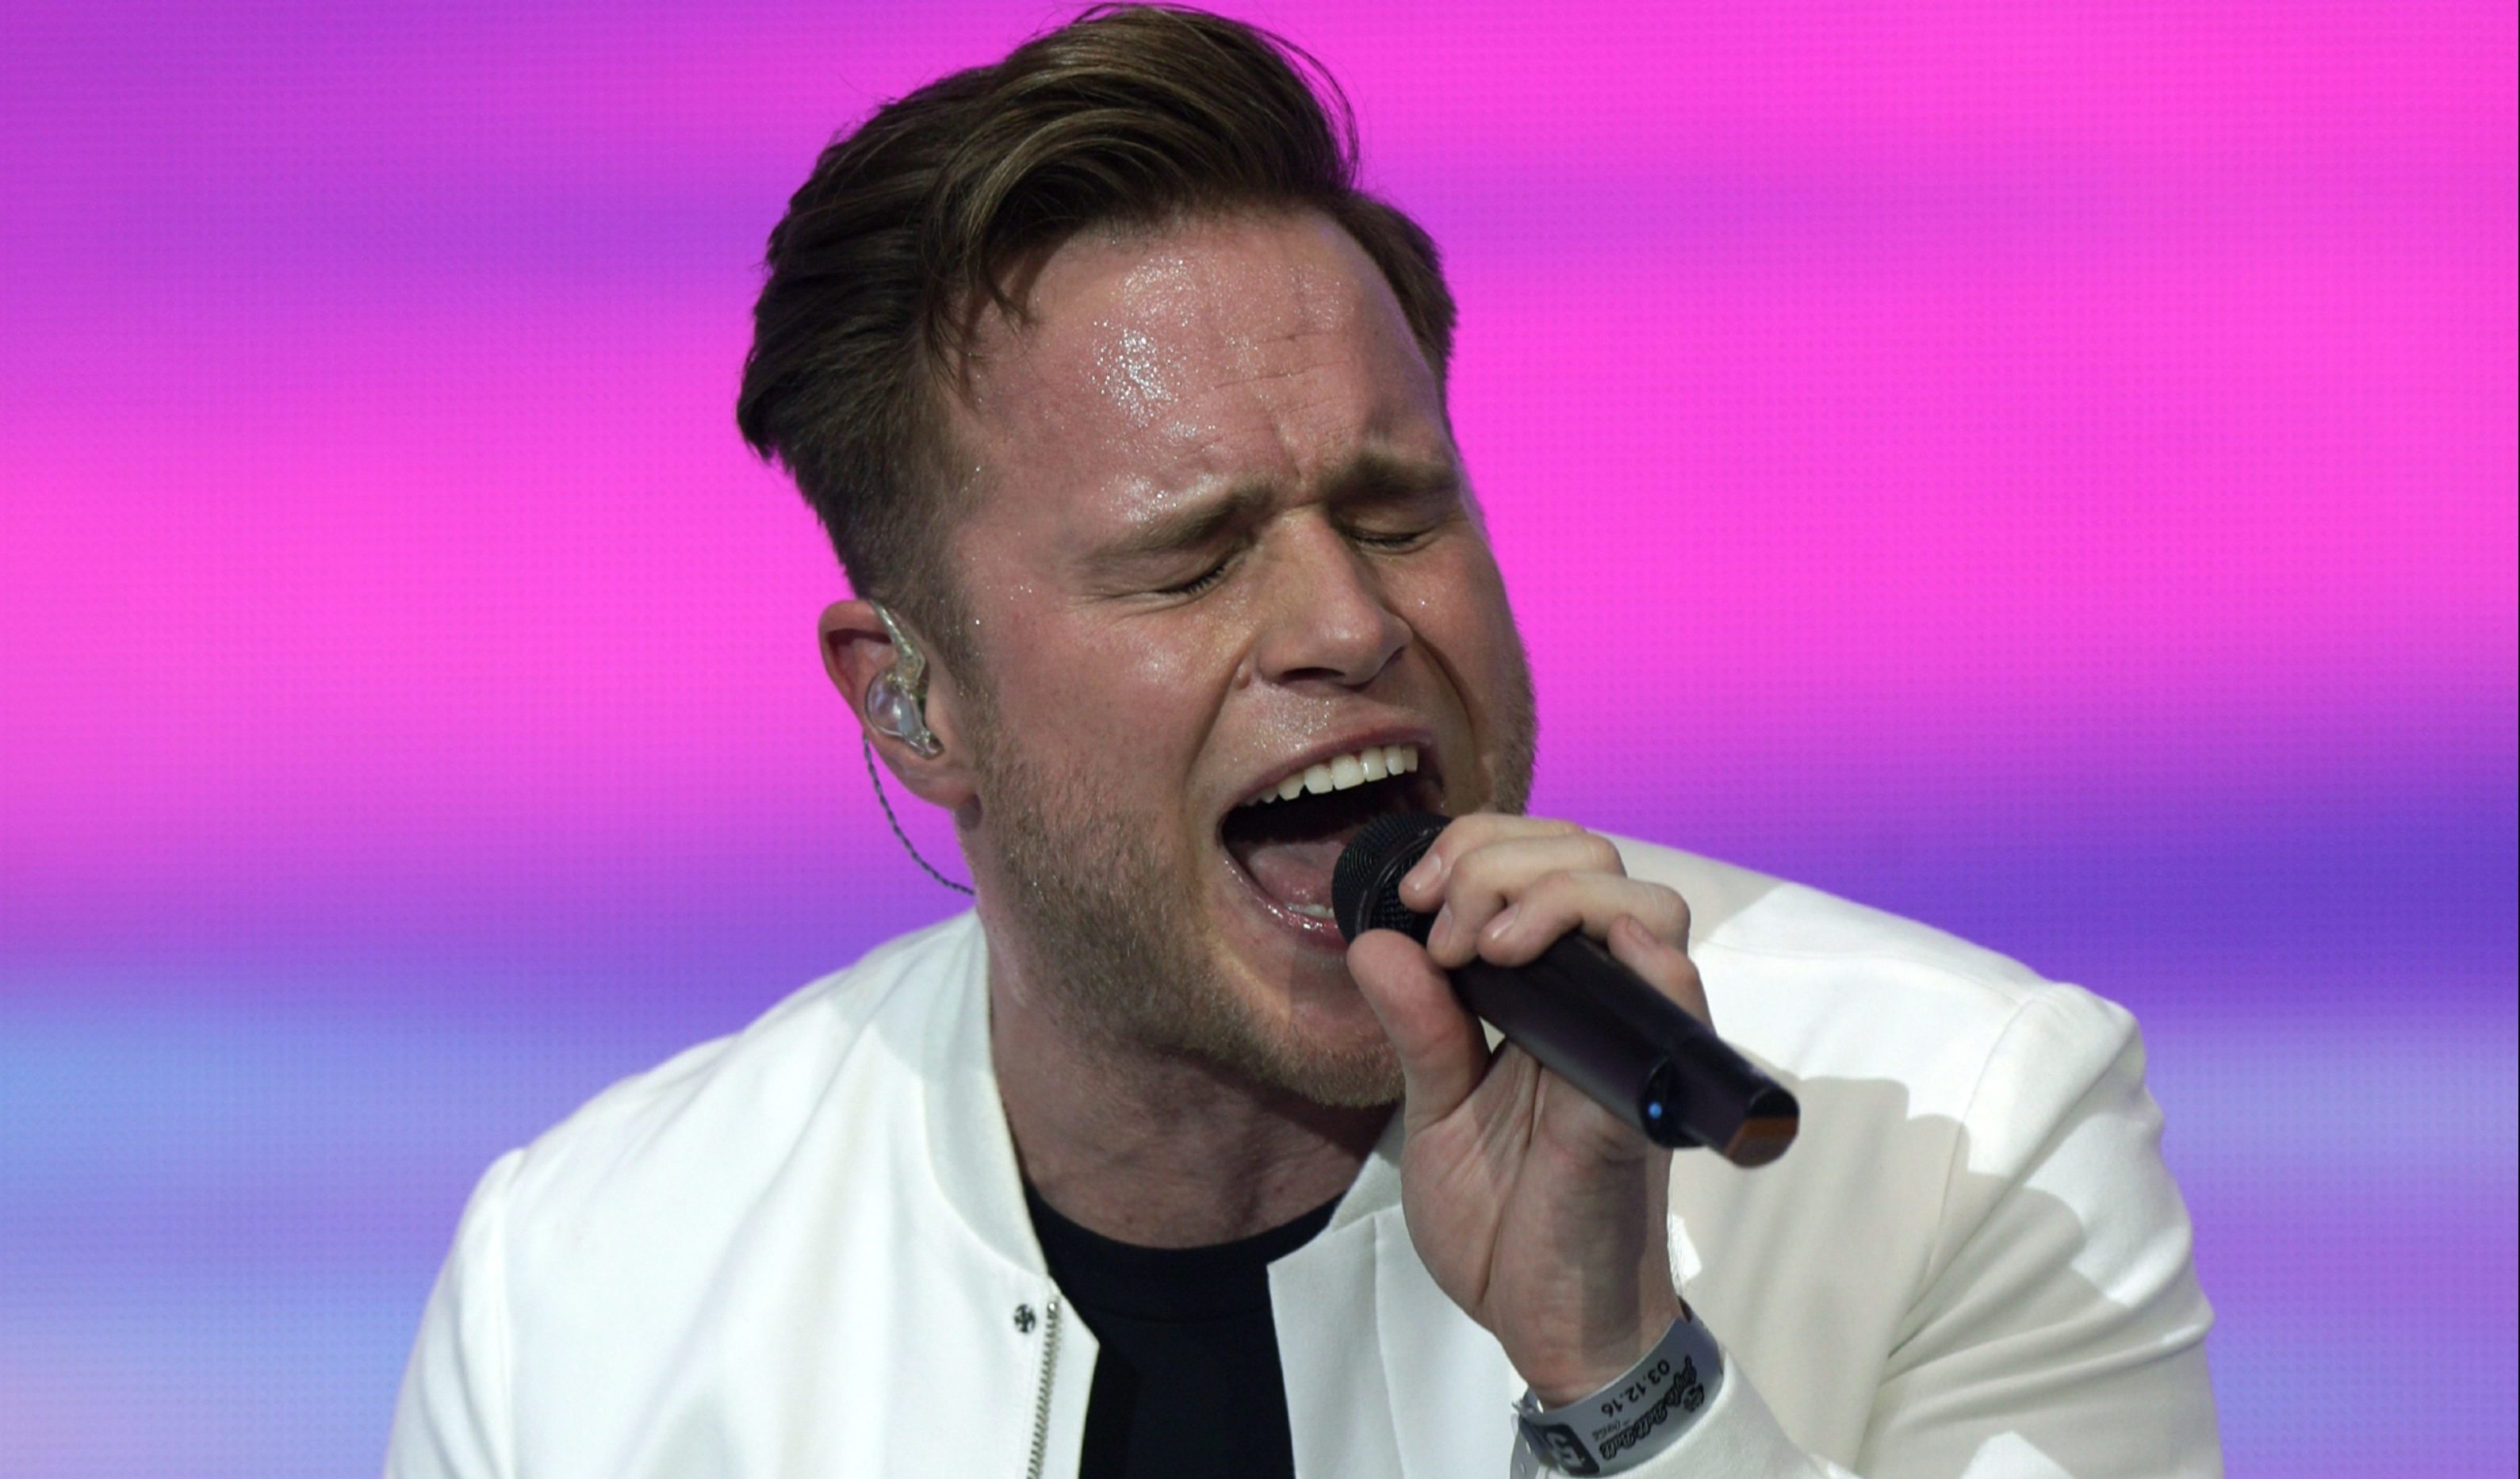 Olly Murs in action.